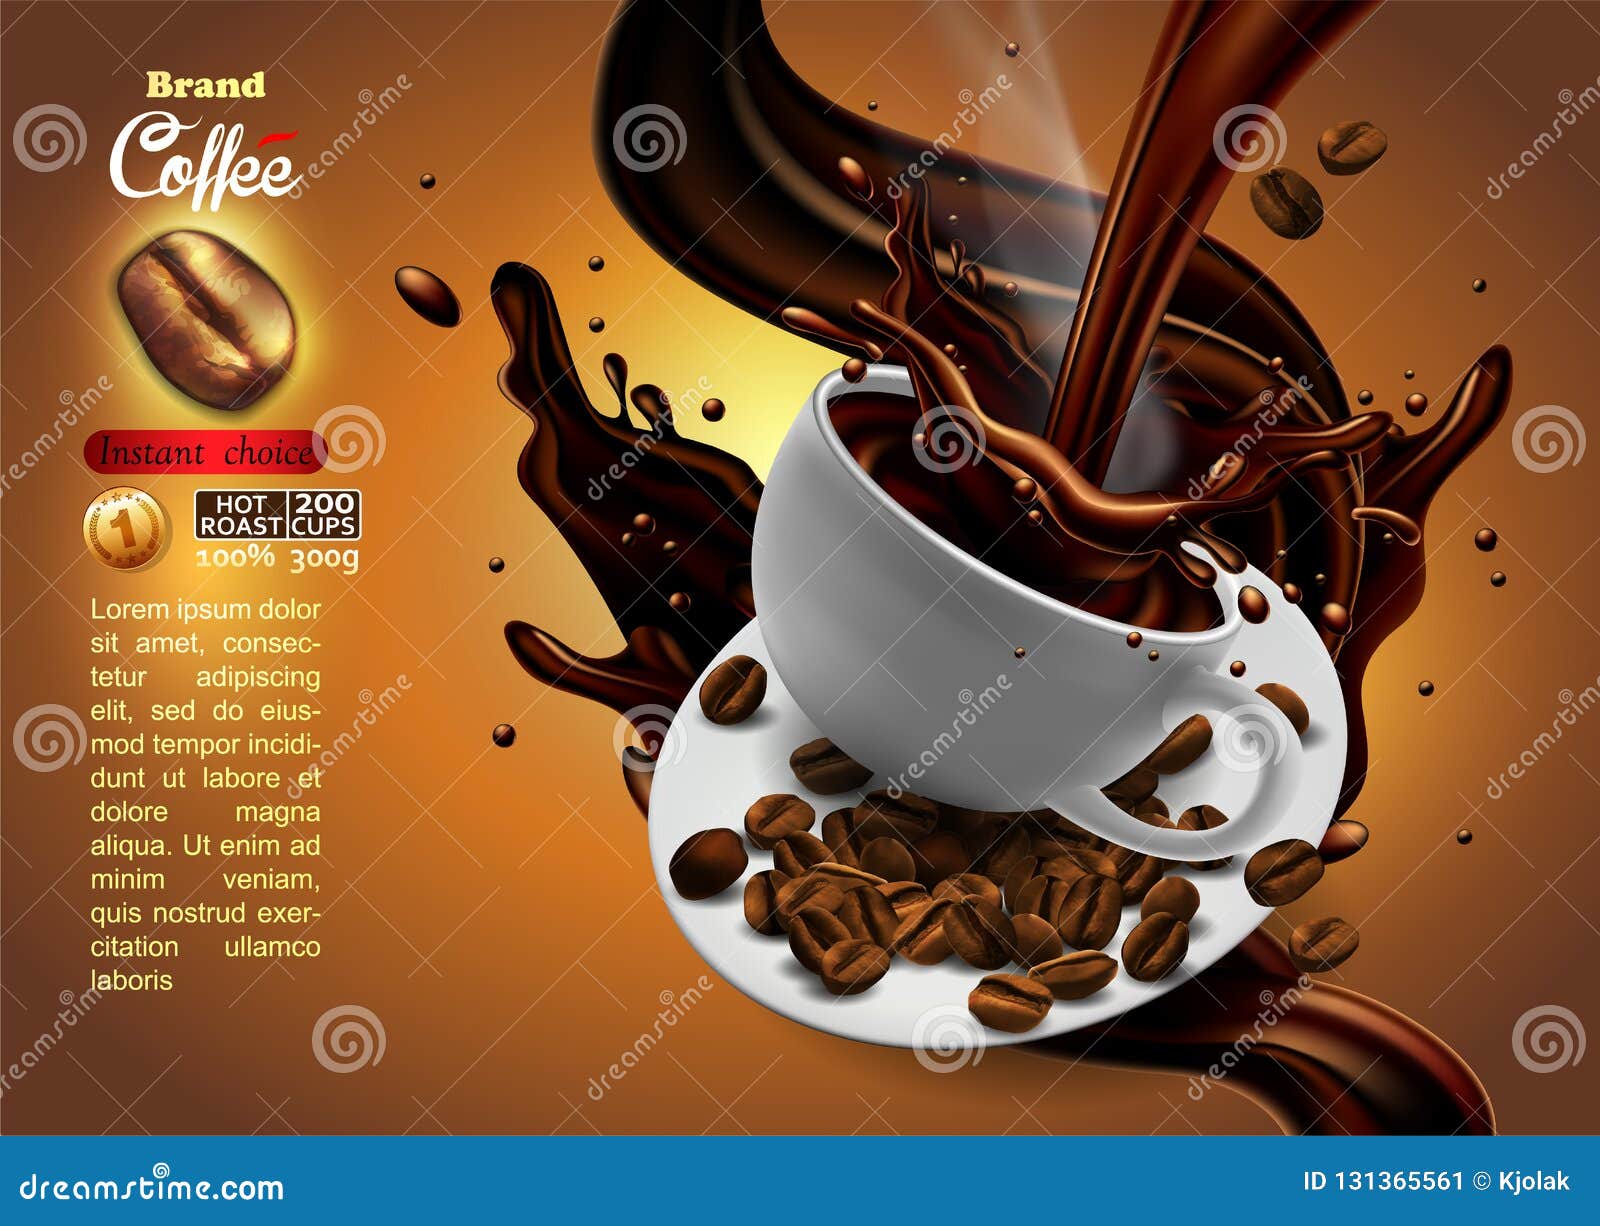 Coffee Advertising Design with Cup of Coffee and Splash Effect, Stock  Vector - Illustration of banner, aromatic: 131365561